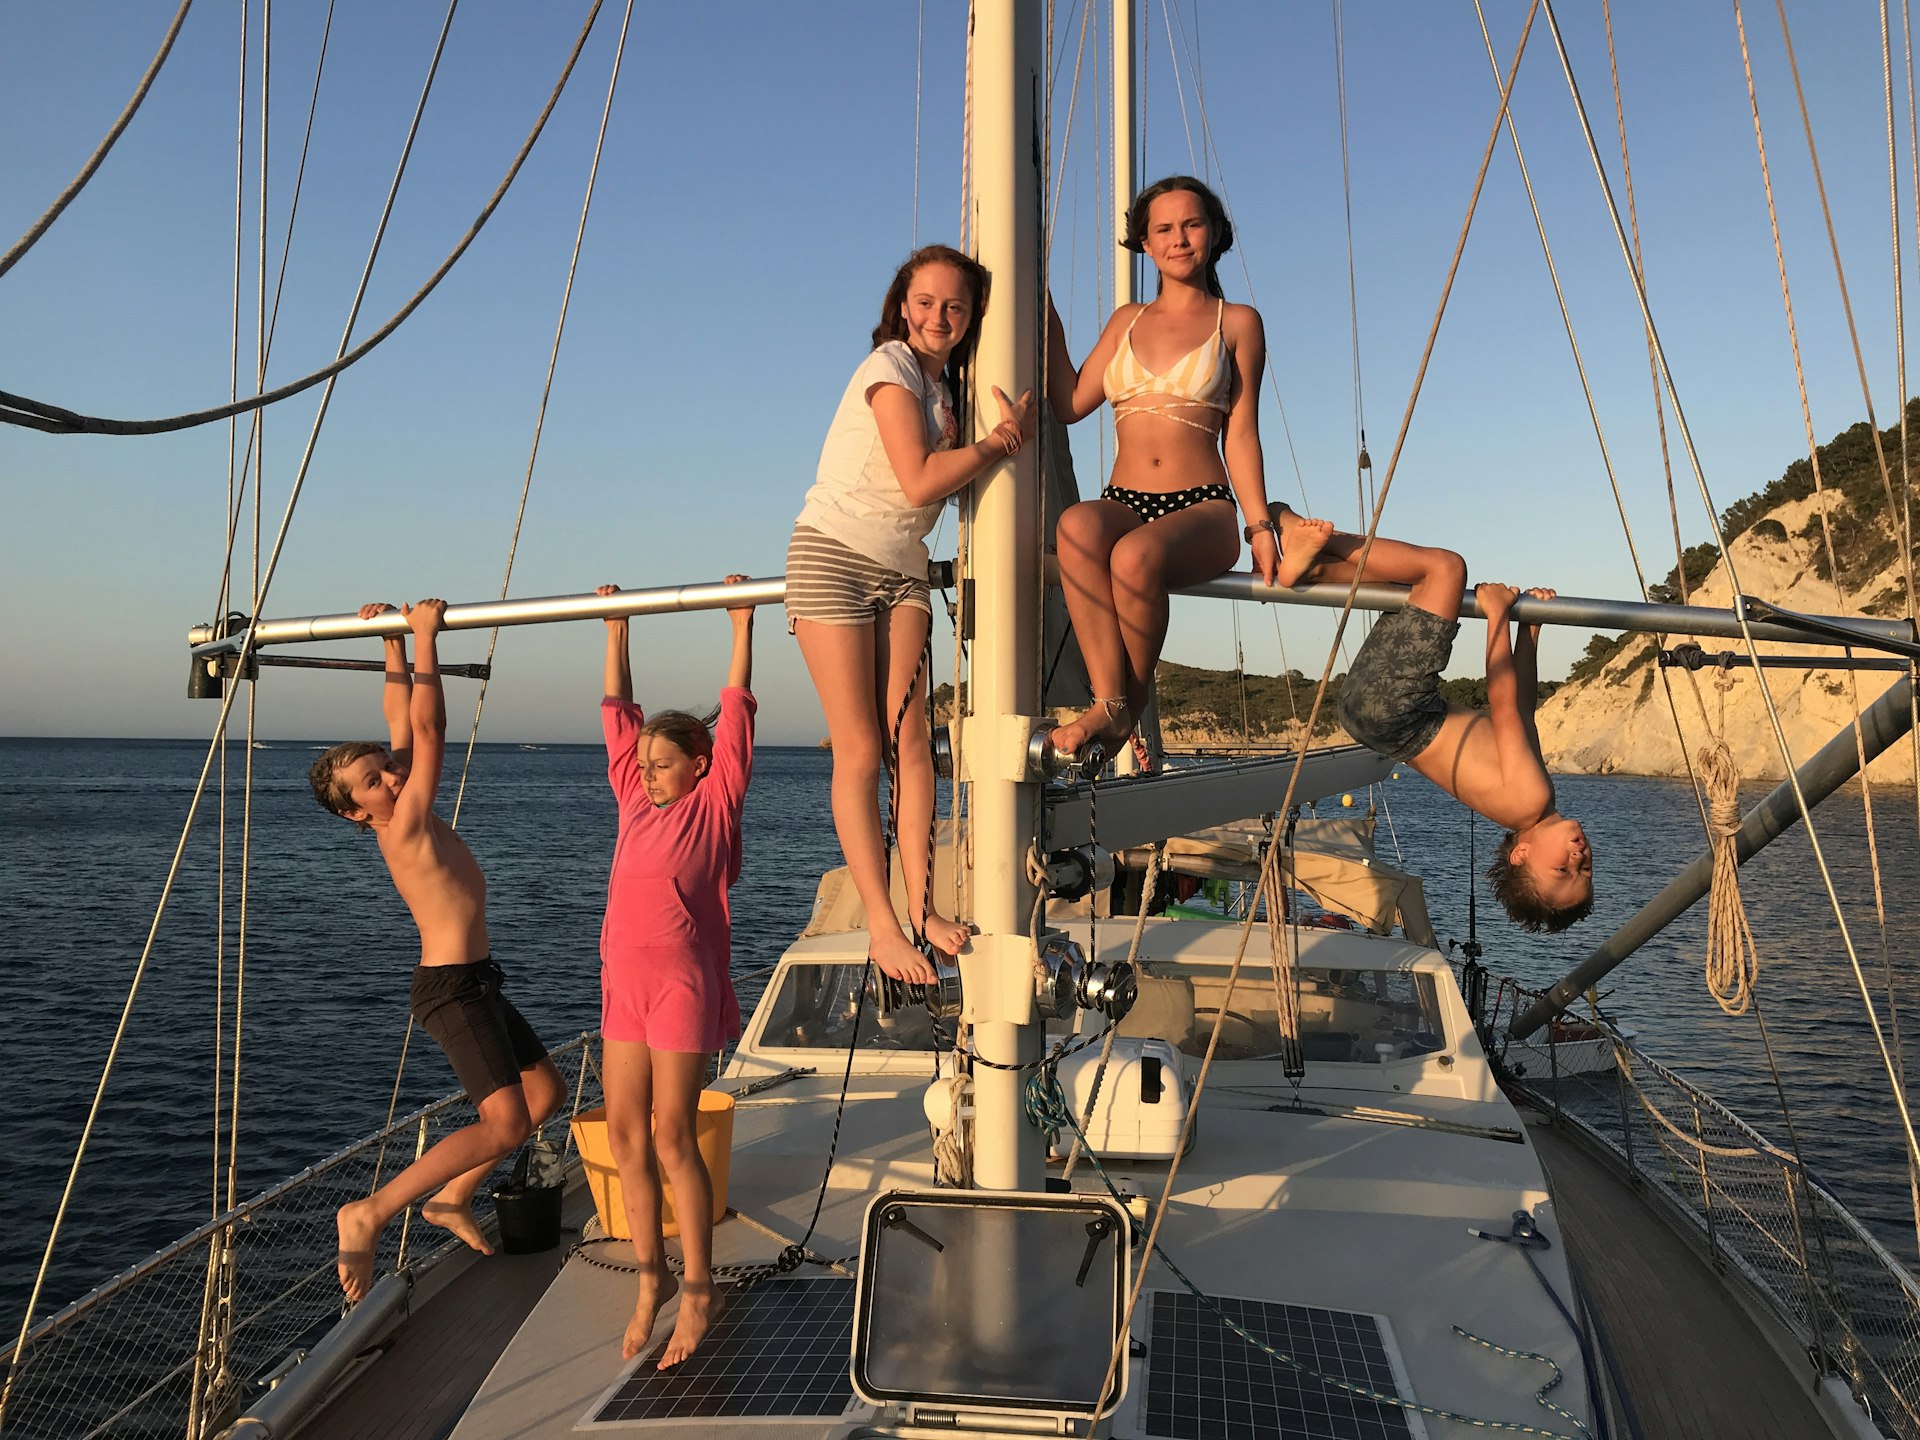 Three kids hang from the main mast on a yacht, with two other people sitting on it in the centre